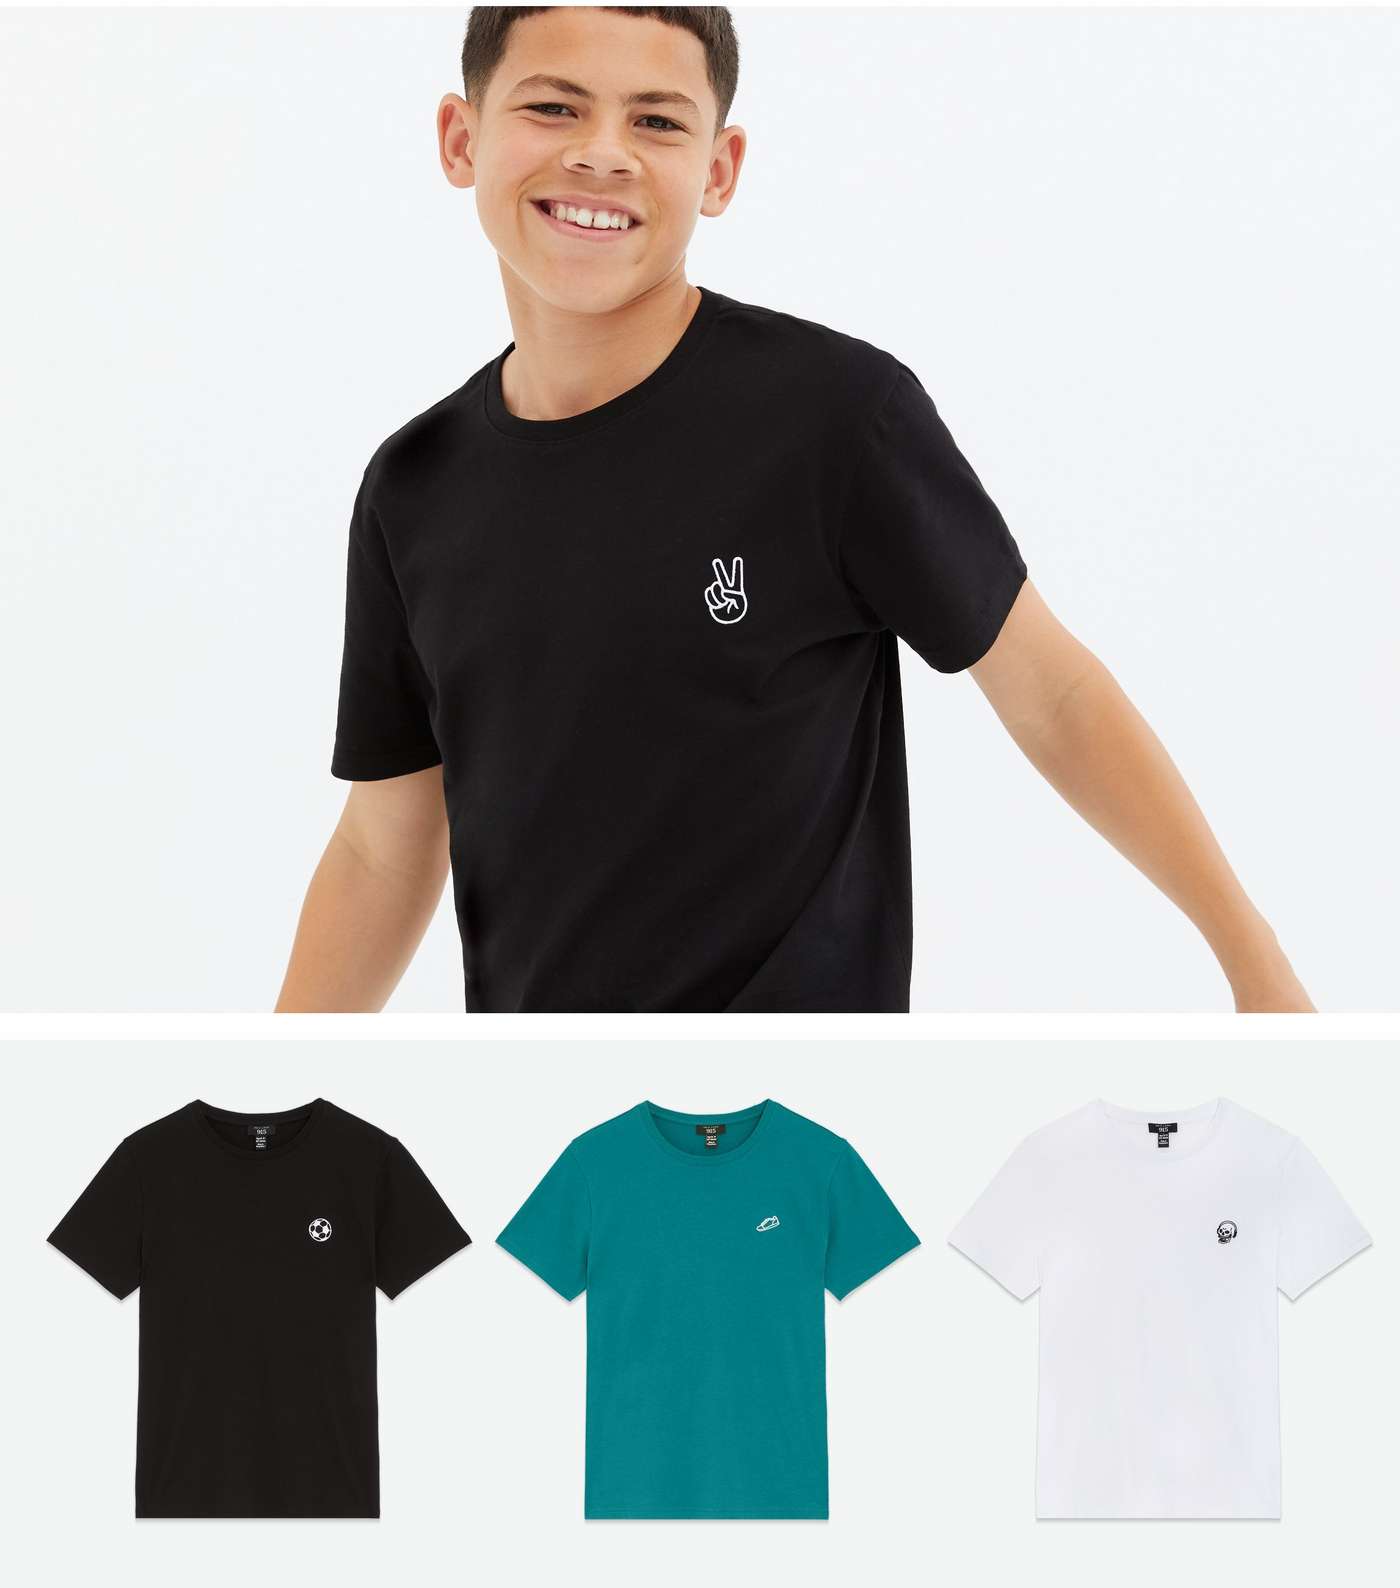 Boys 3 Pack Black Teal and White Mixed Embroidered T-Shirts